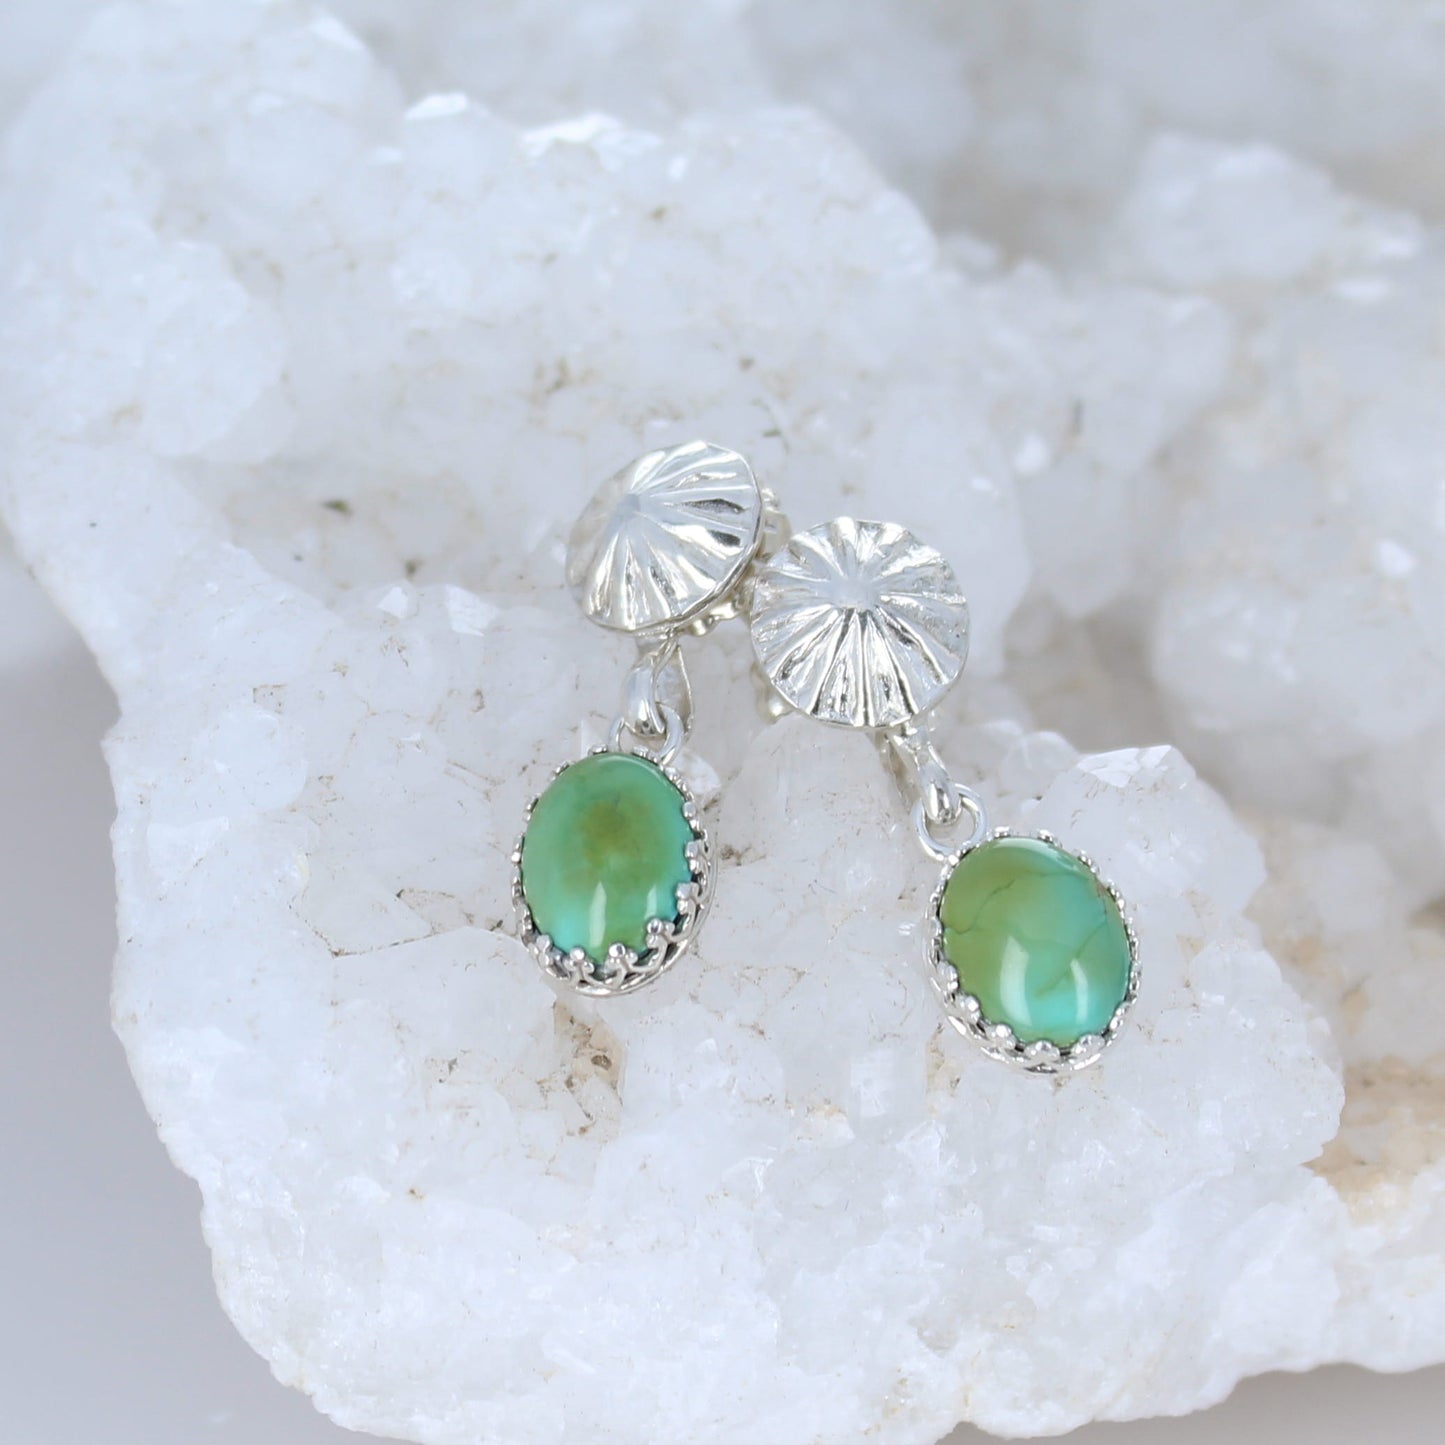 Green Sonoran Gold Turquoise Earrings Sterling Silver Drops